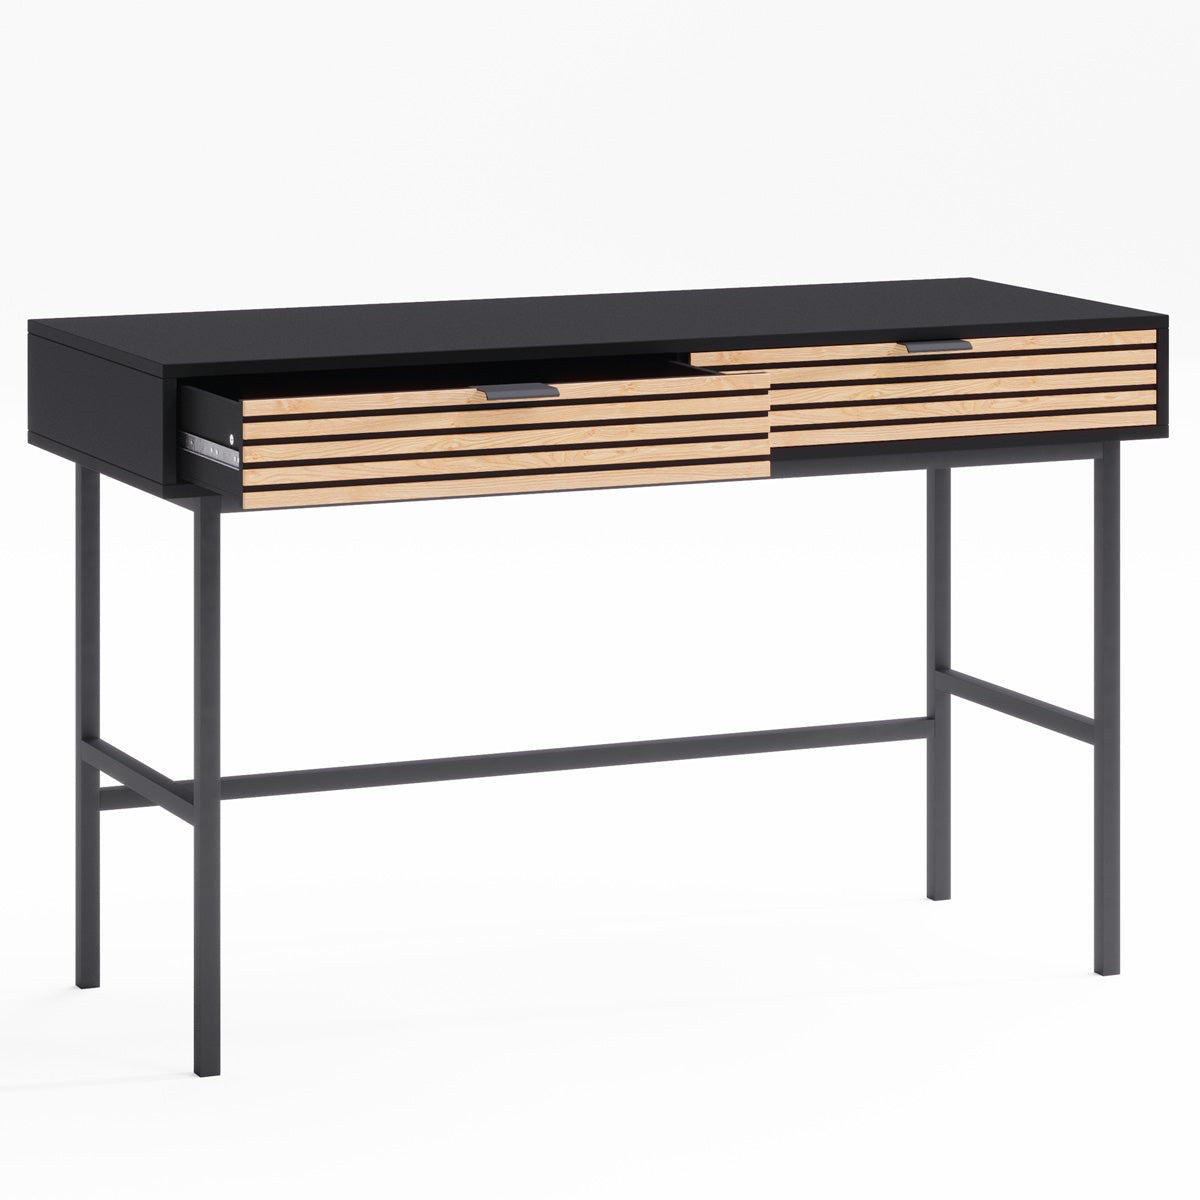 Black Study Desk Console Table with Slatted Drawers (Zen Collection)